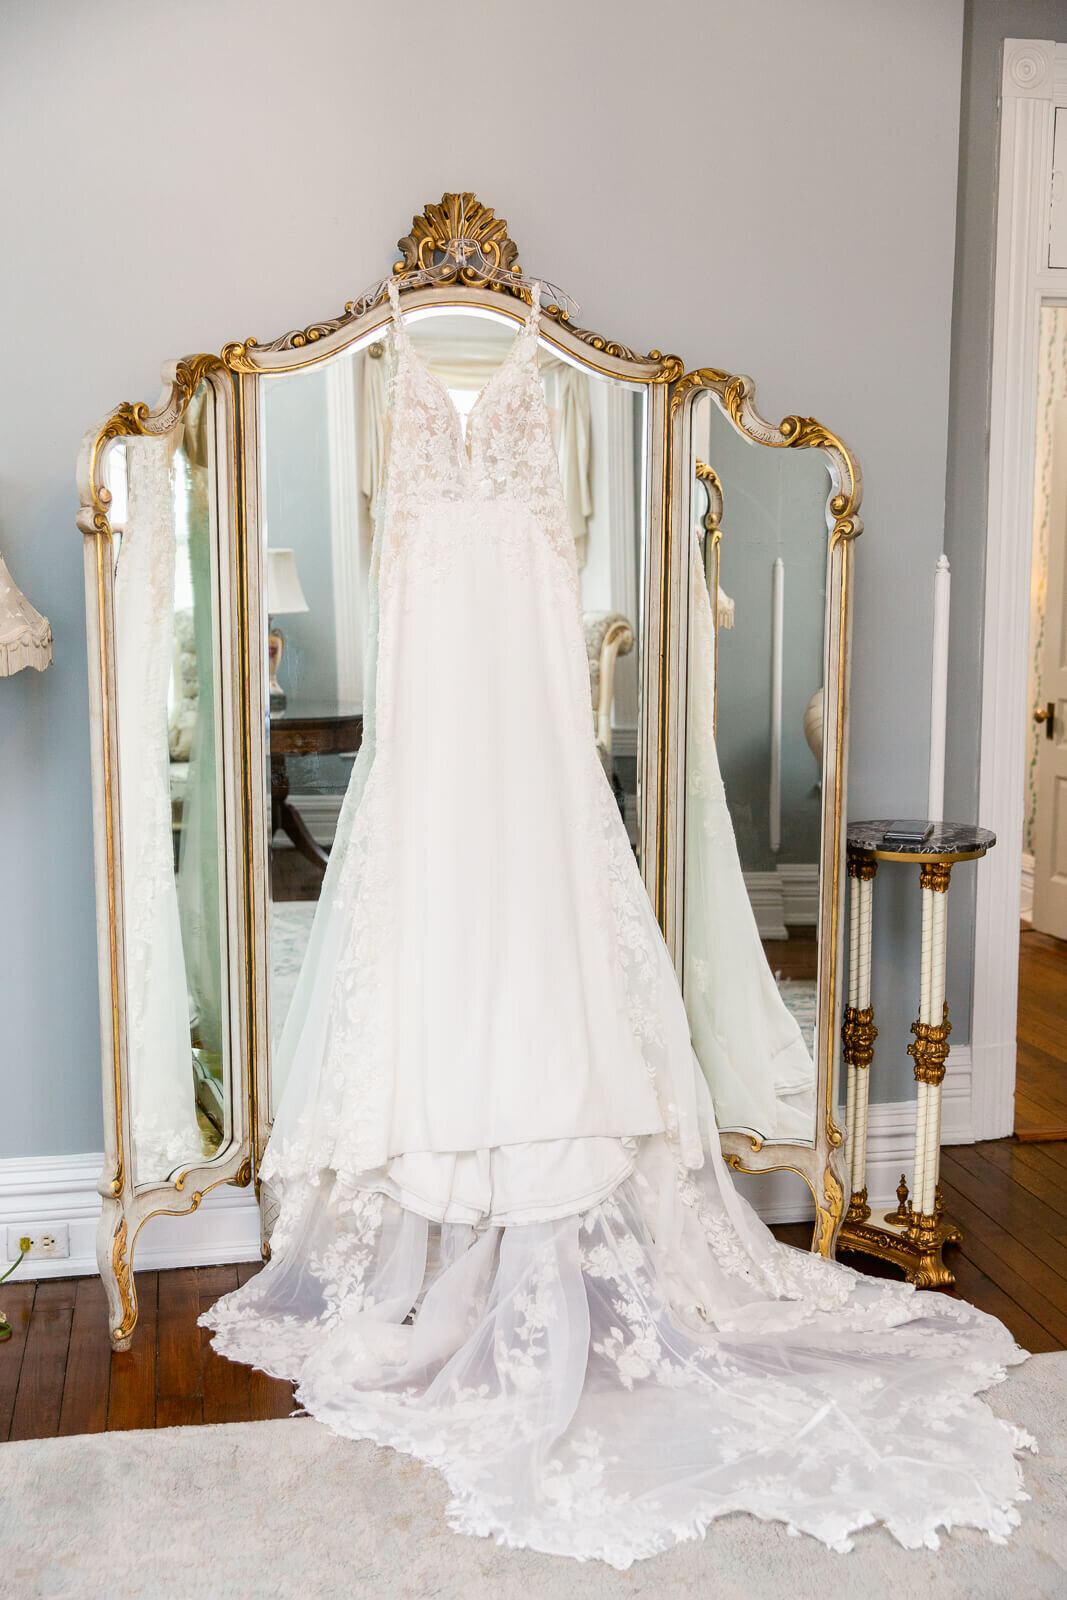 Gorgeous wedding dress hanging from mirror in the bridal suite at Ceresville Mansion. Captured by Bethany Aubre Photography.